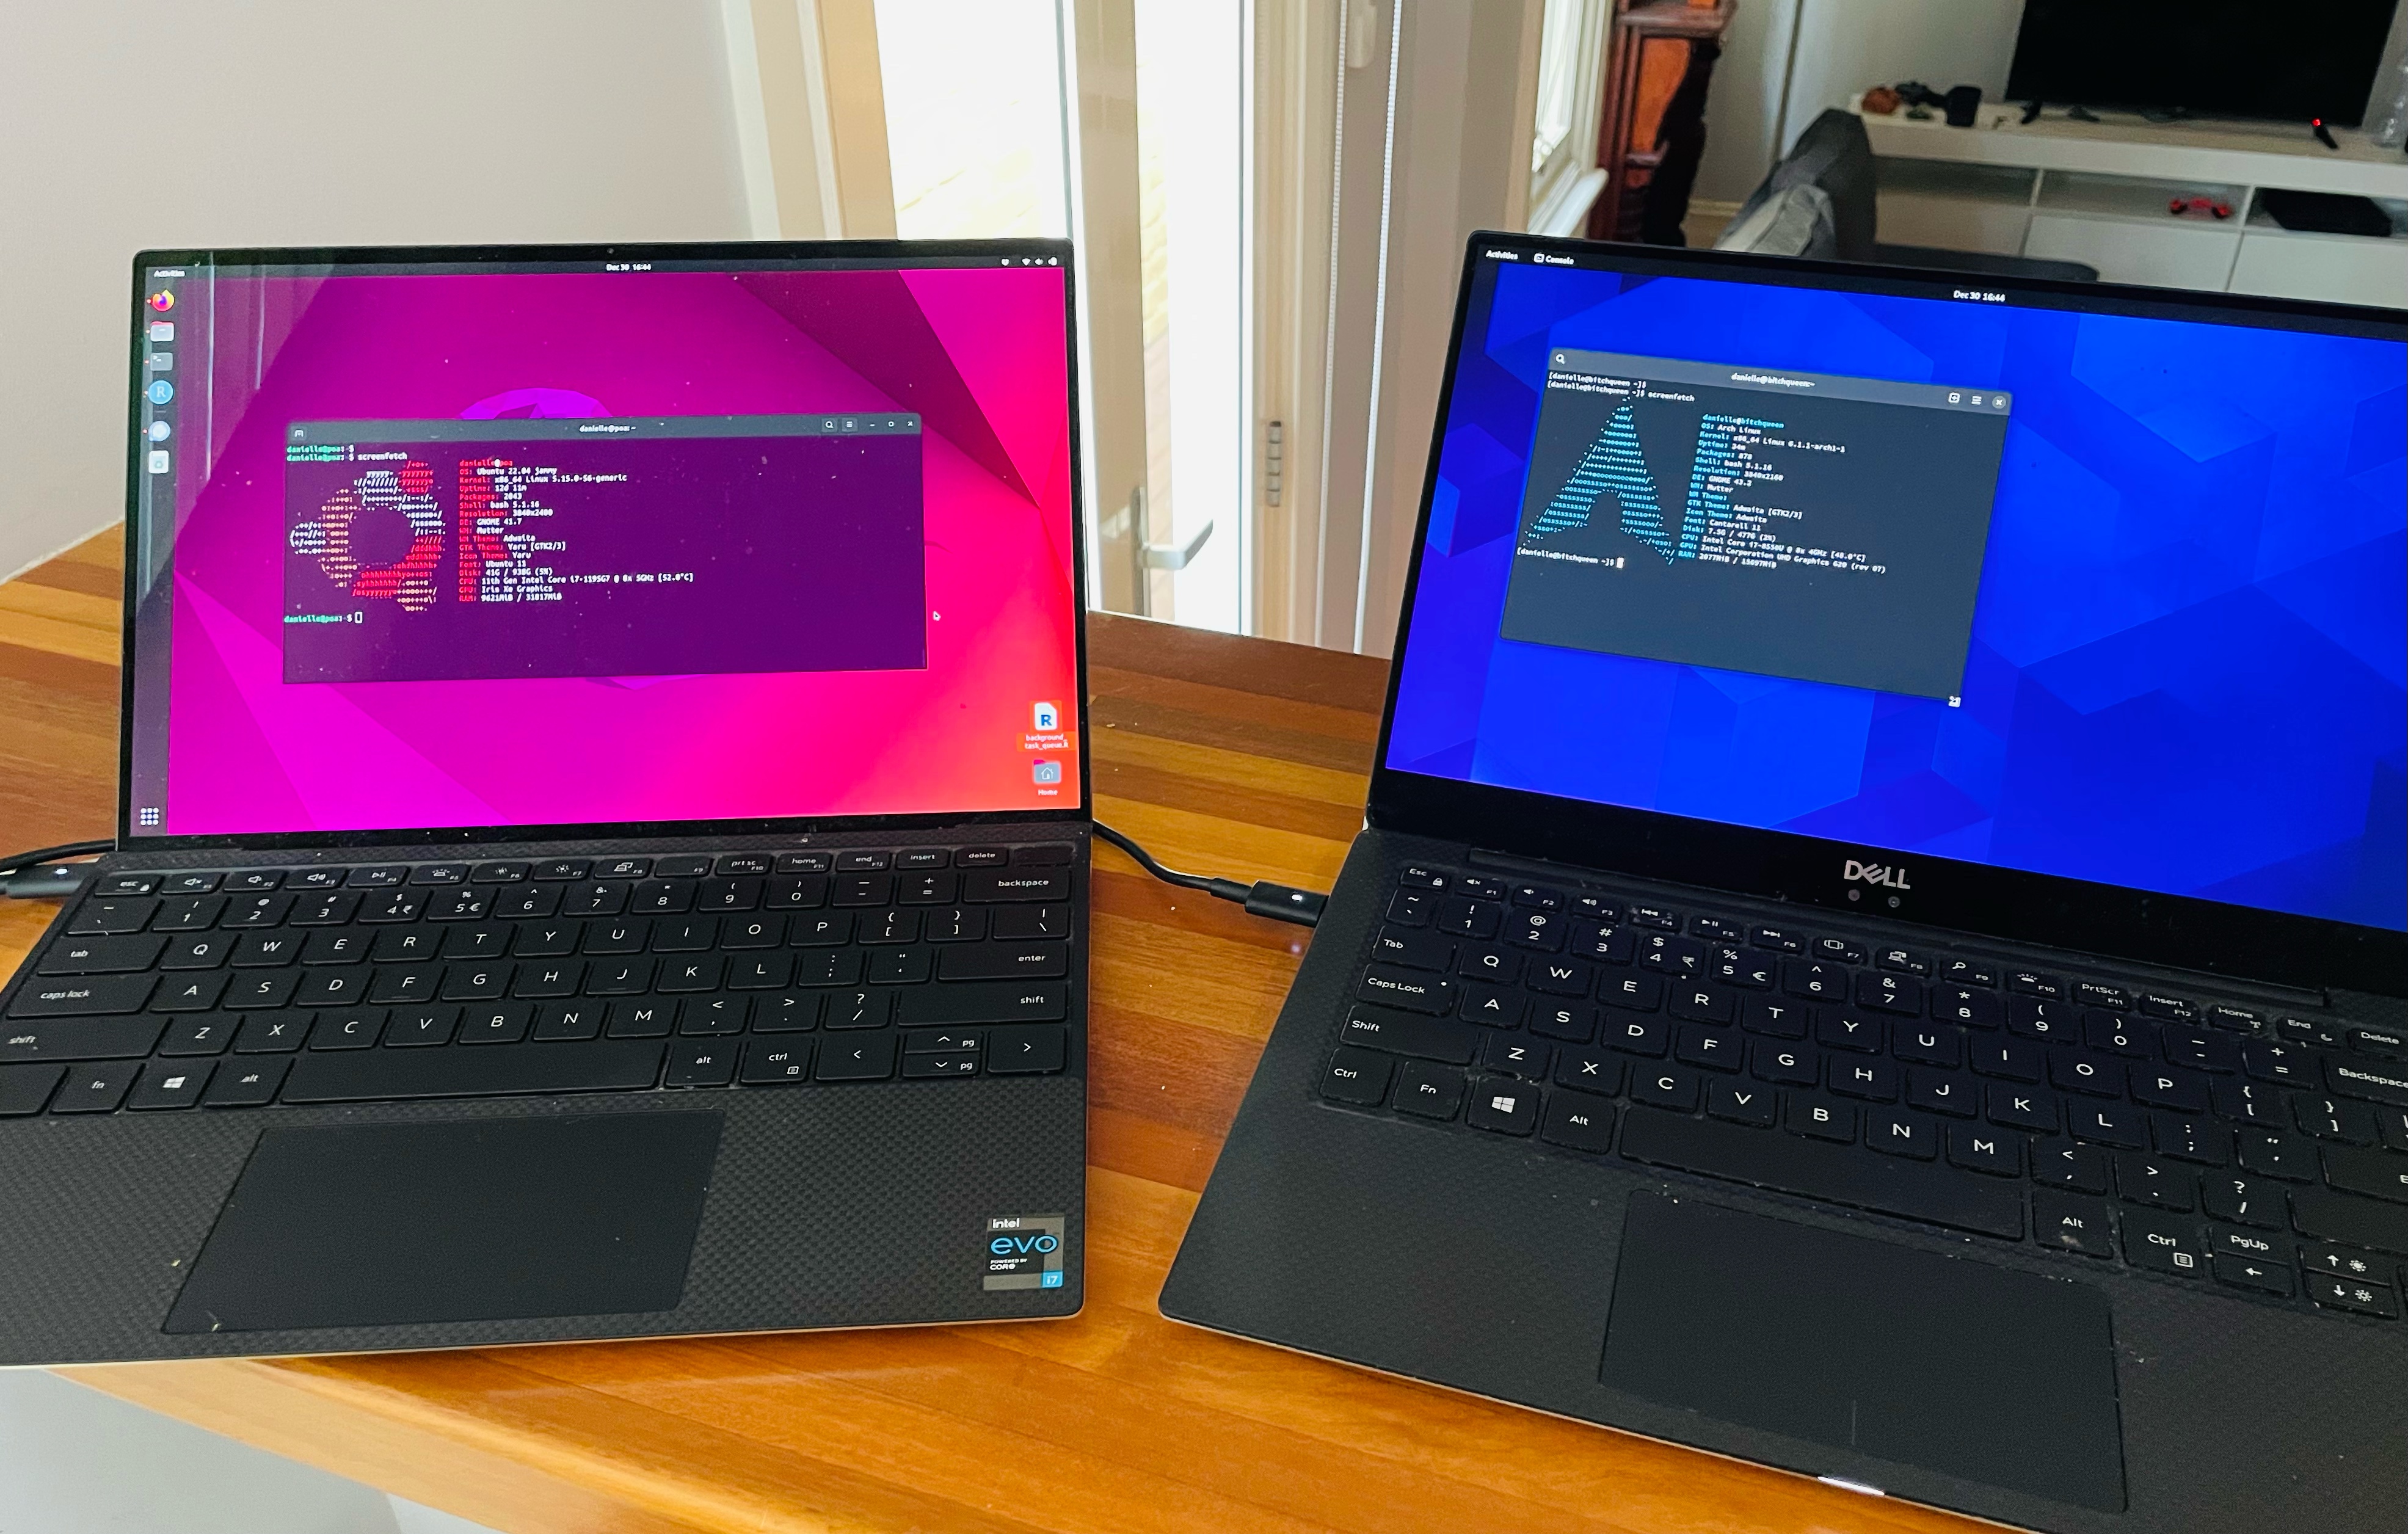 My regular laptop running Ubuntu (on the left) and the newly-built Arch laptop (on the right)